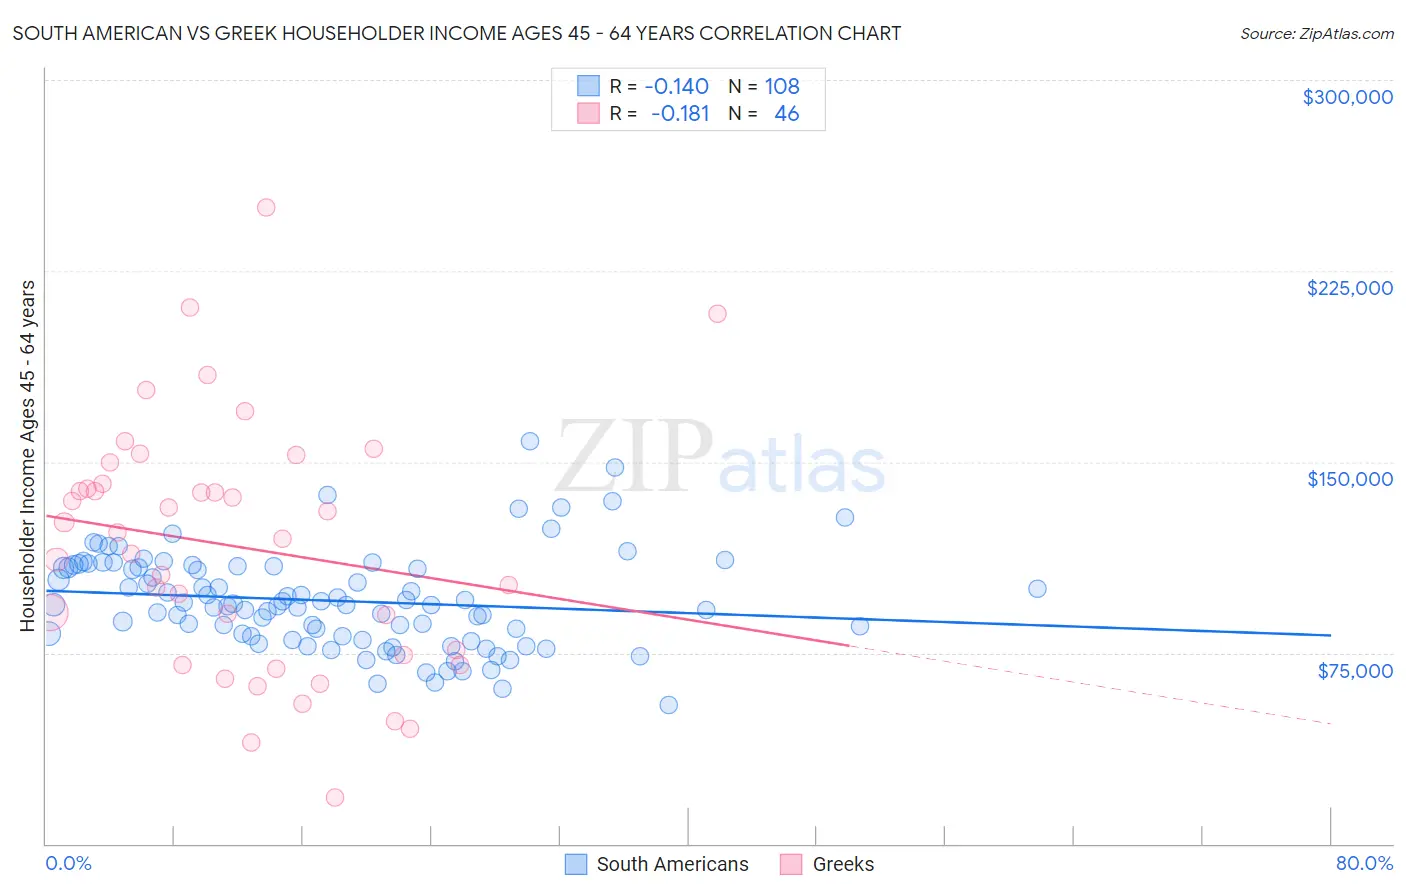 South American vs Greek Householder Income Ages 45 - 64 years